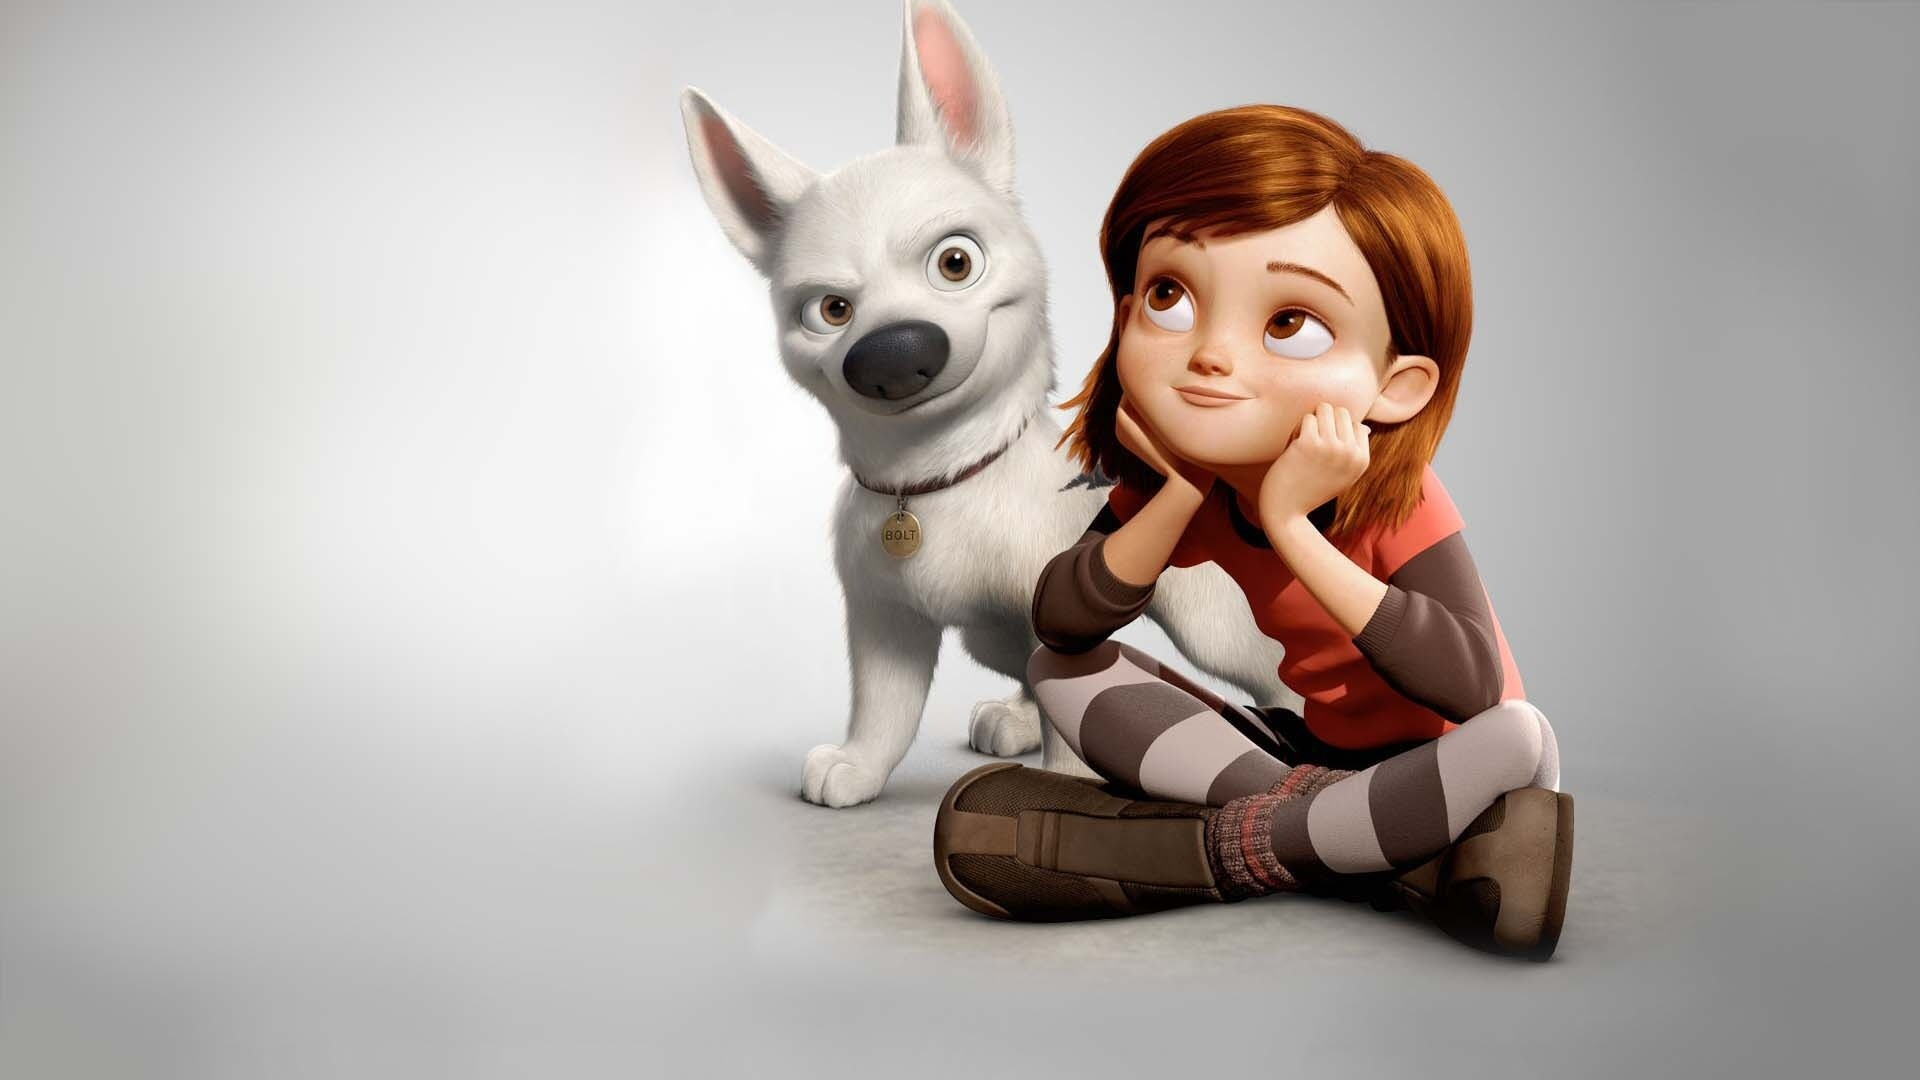 animation movies download hd